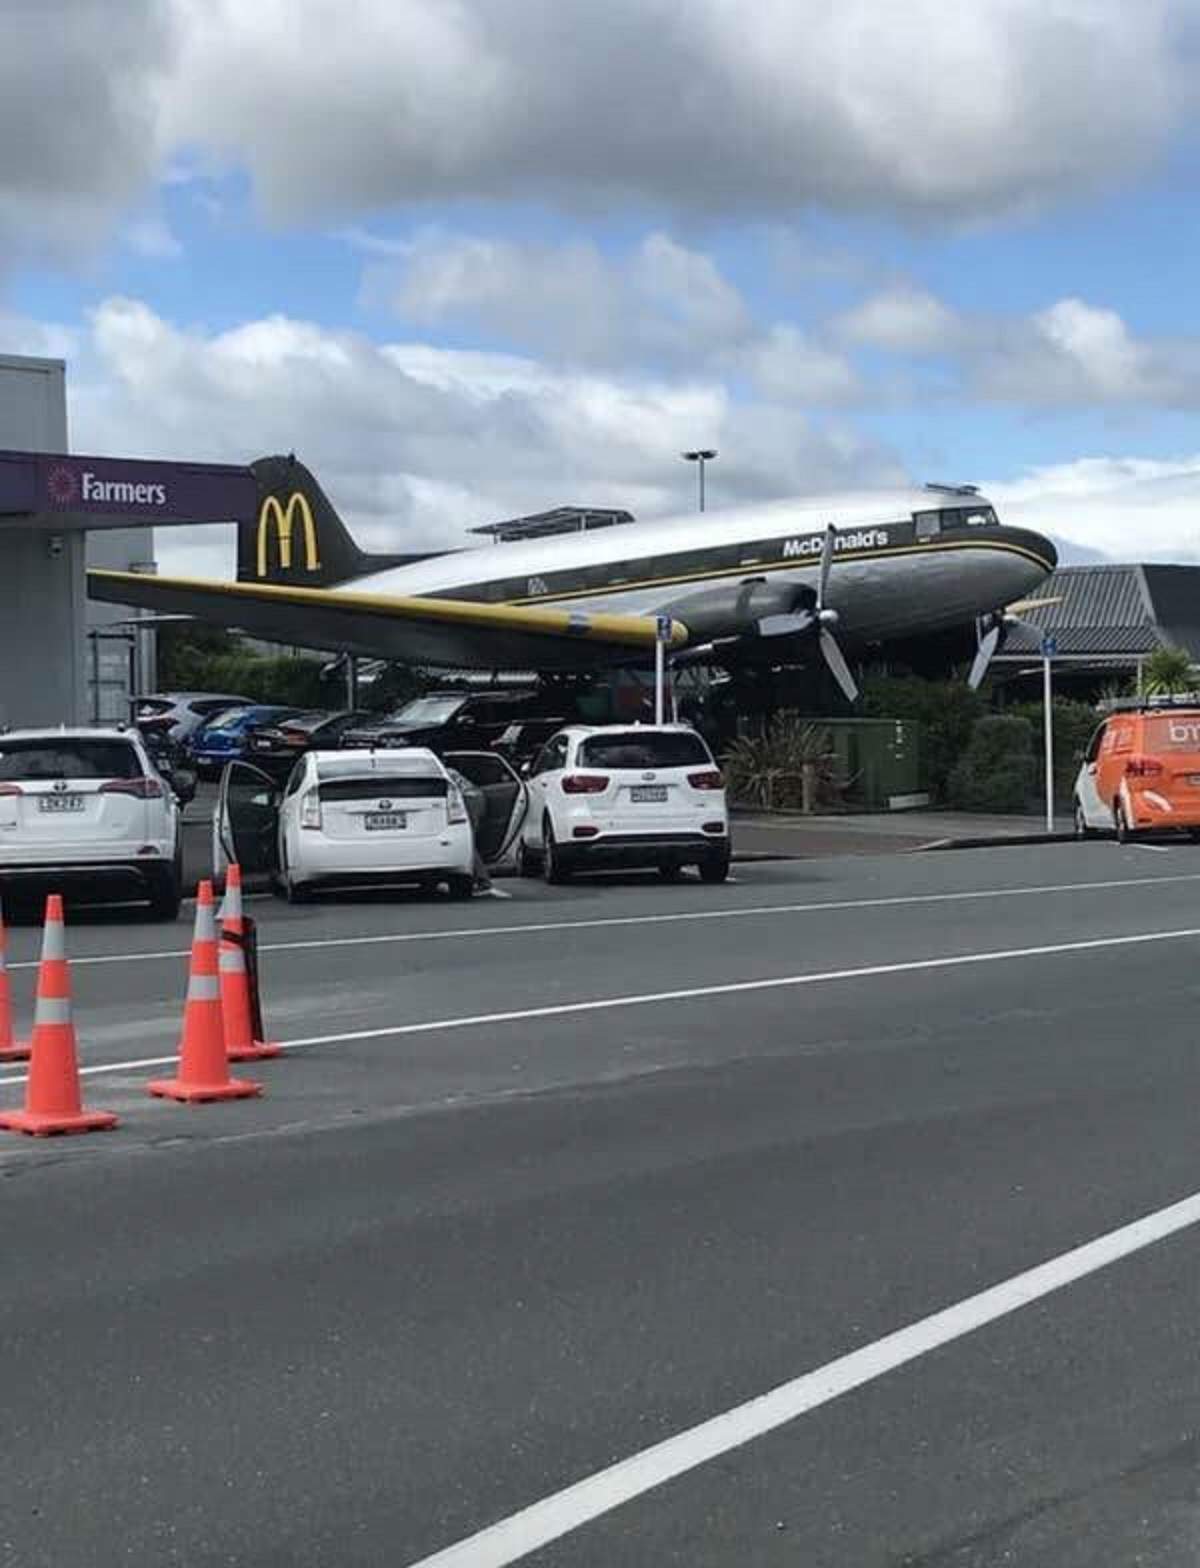 And all McDonald's should be this cool — aka, like this one in New Zealand built out of an old airplane.